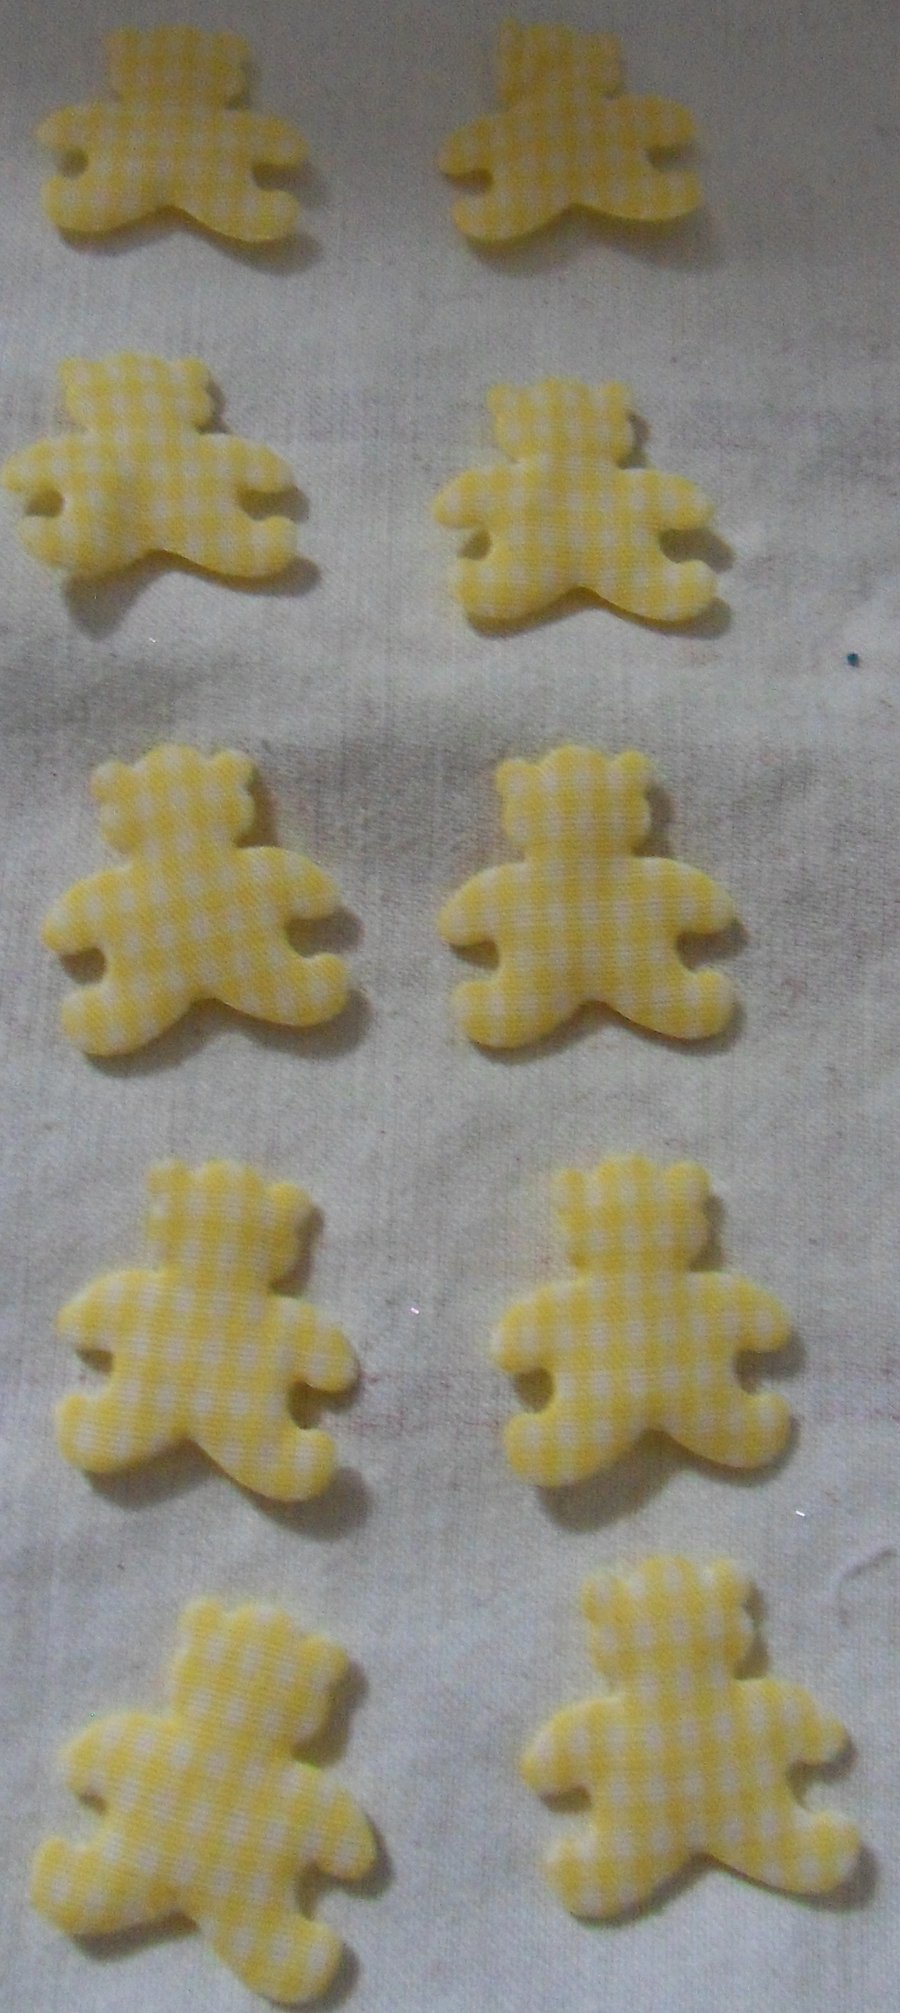 10 yellow gingham teddy bear embellishments. Approx 1" Free postage